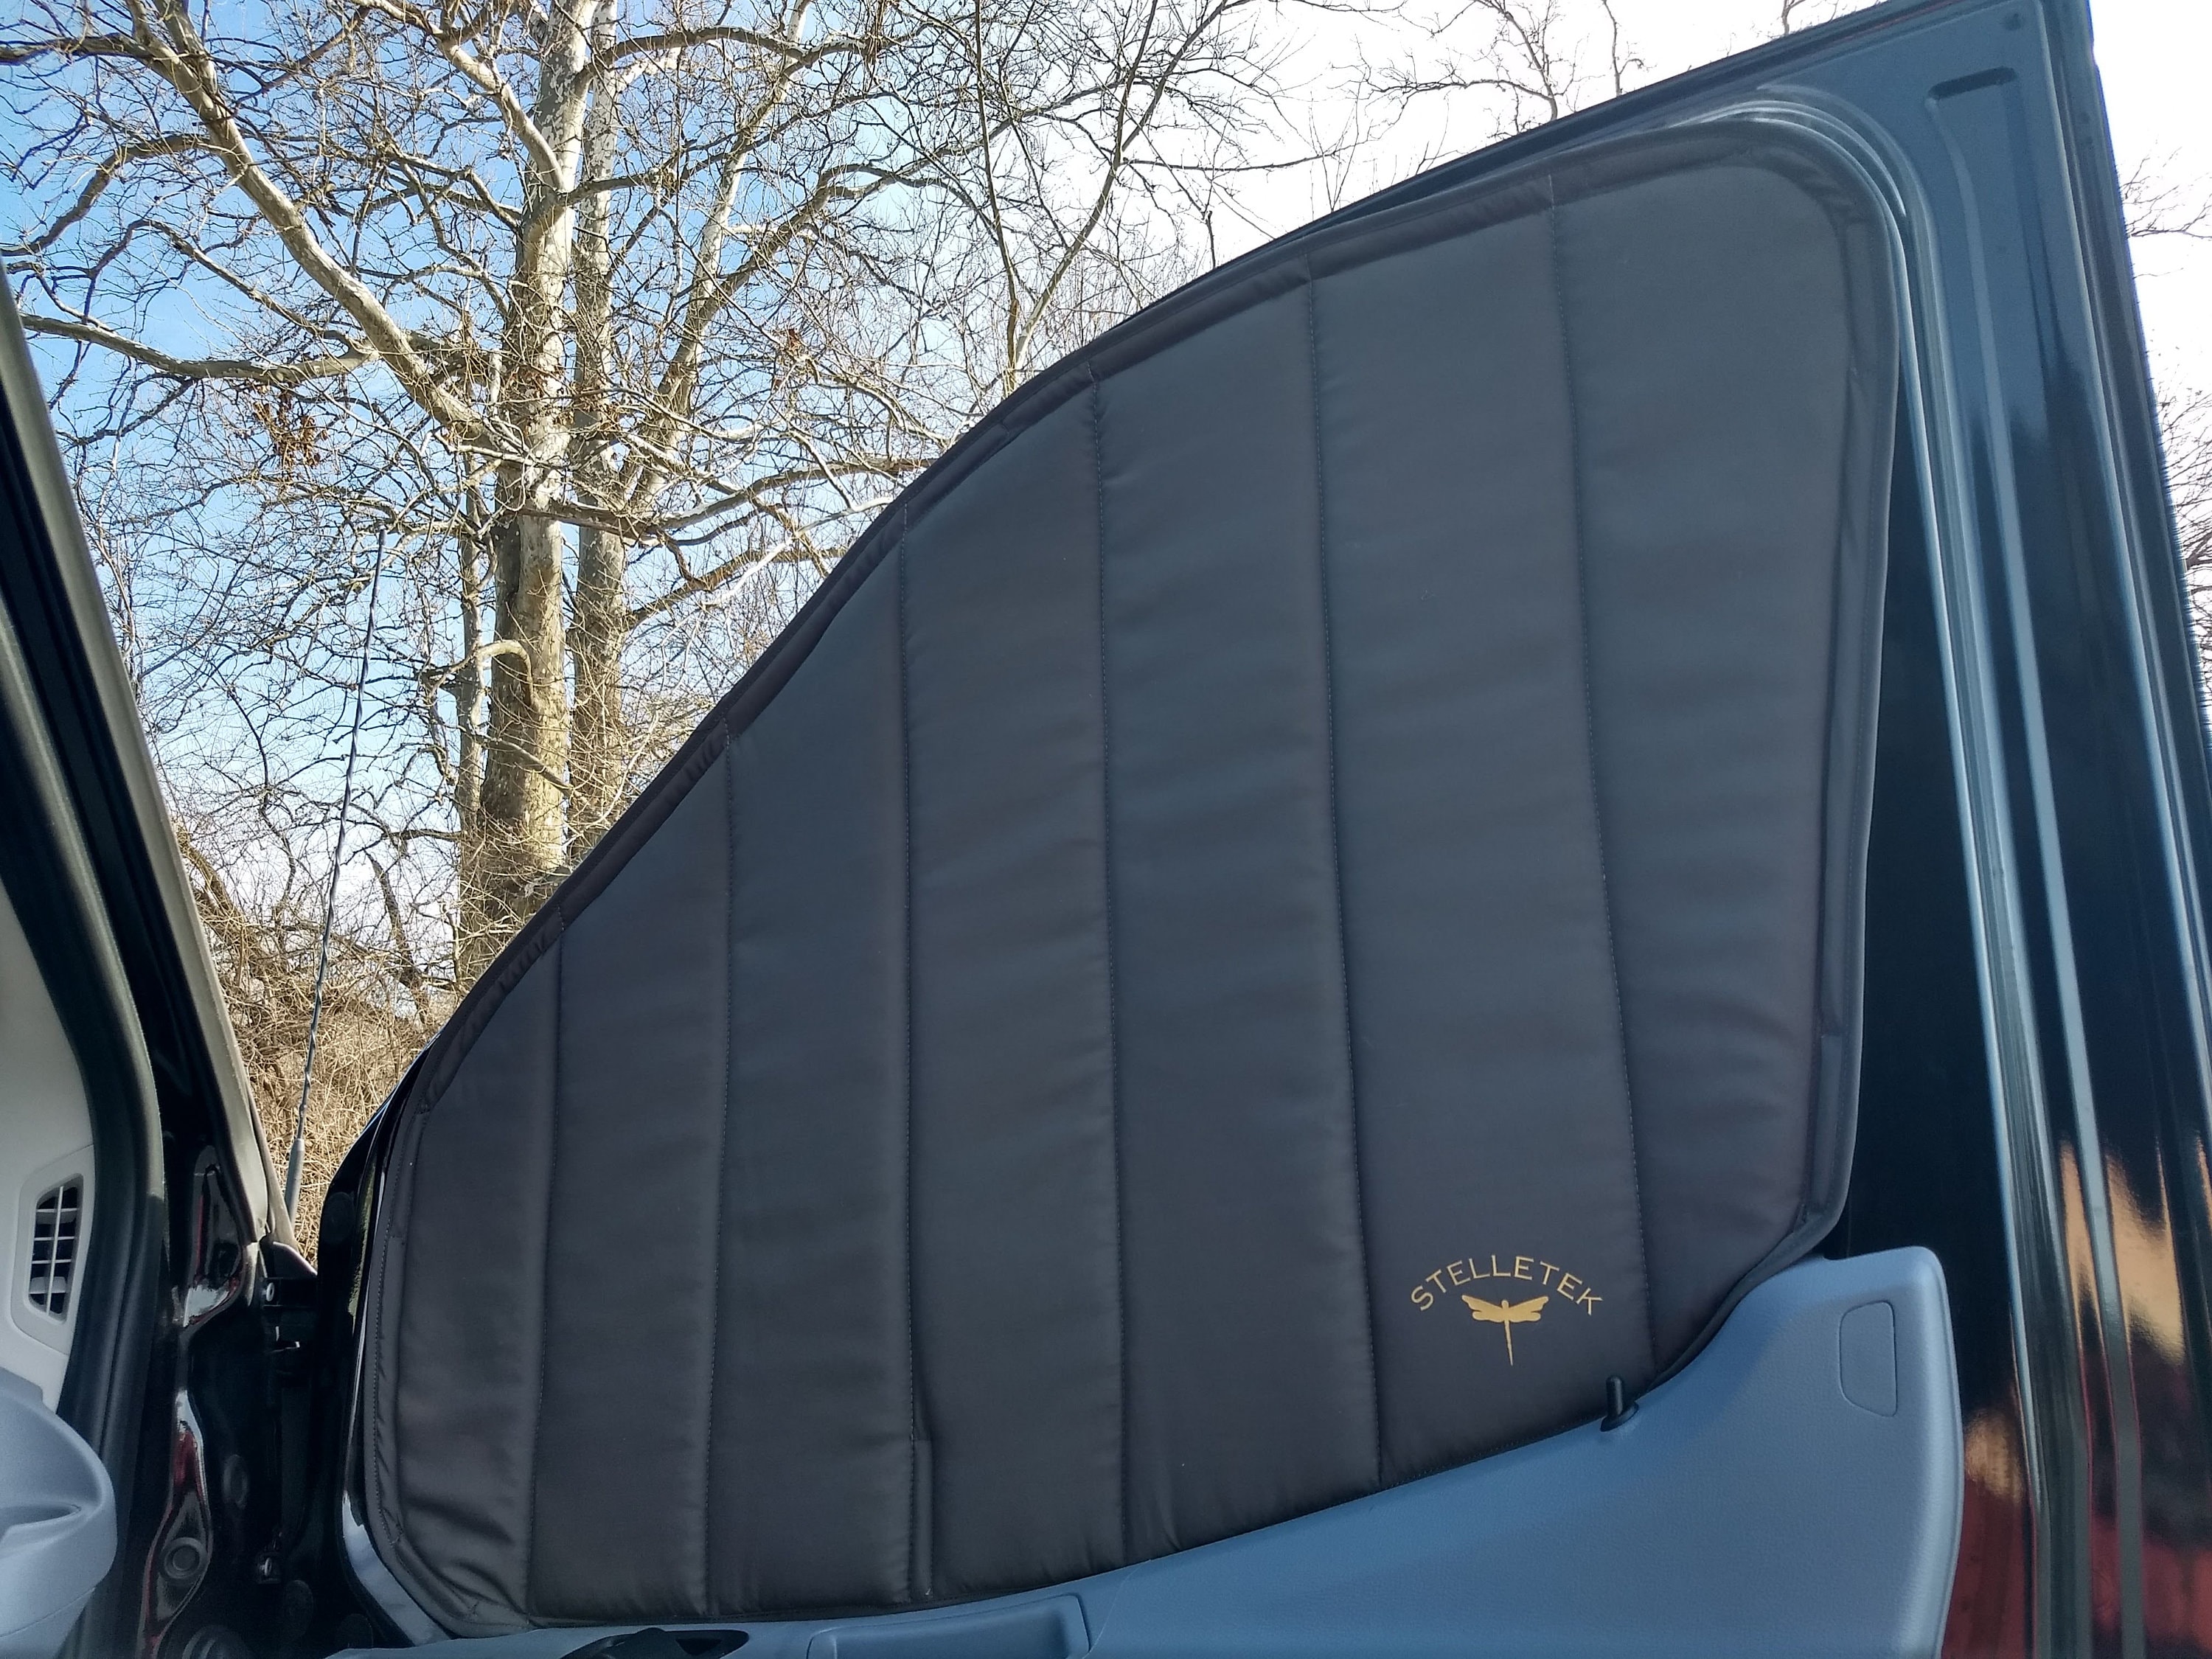 Ford transit insulated window covers - .de